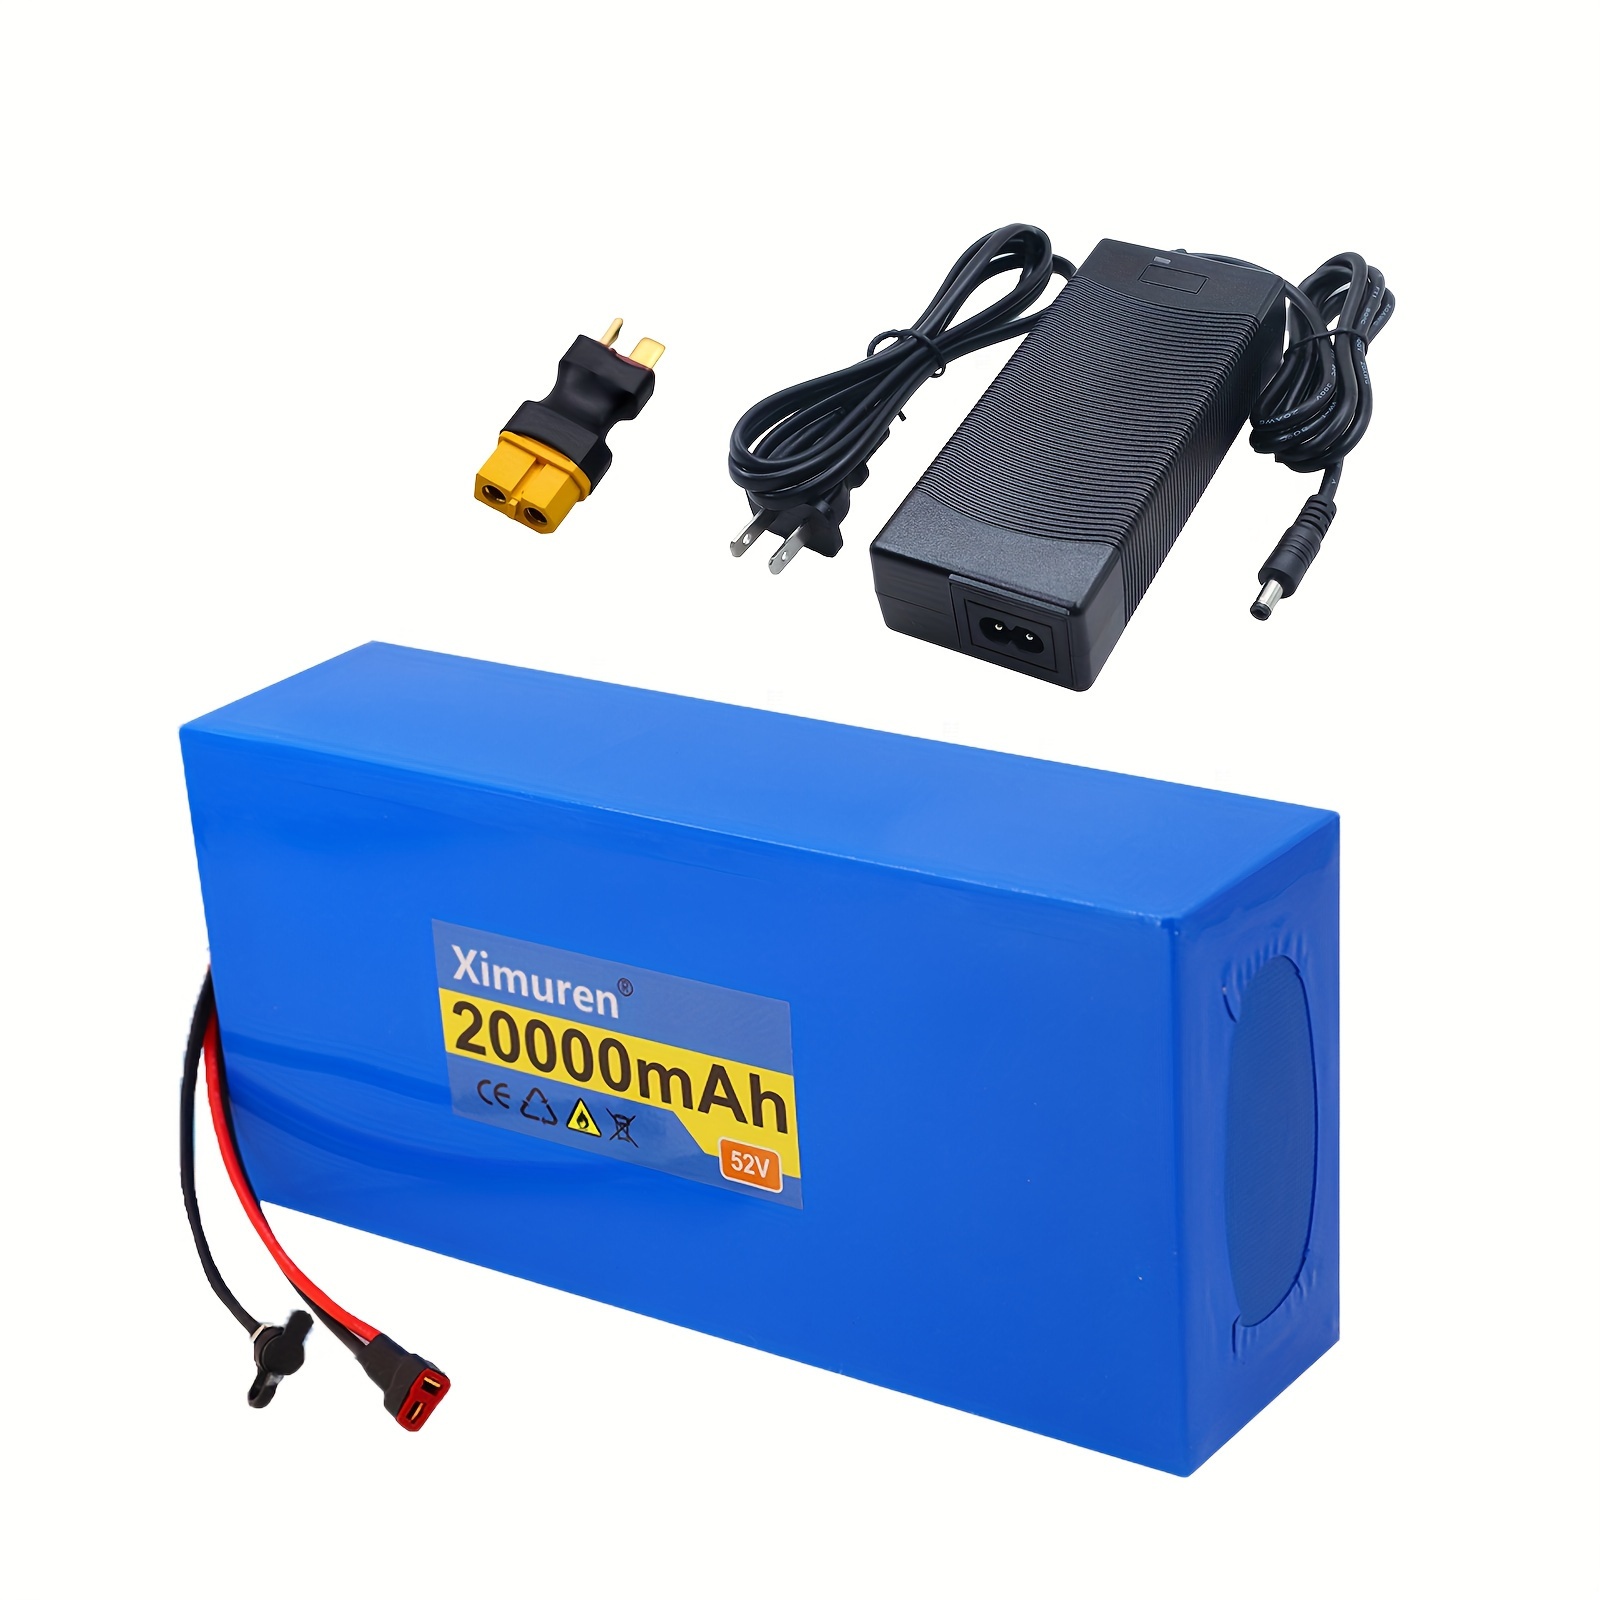 

52v Ebike Battery 52v 20ah Battery Pack Scooter Battery Pack For 500w High Power Capacity 52v20000mah Battery Pack Electric Scooter Bms Board+ Charger